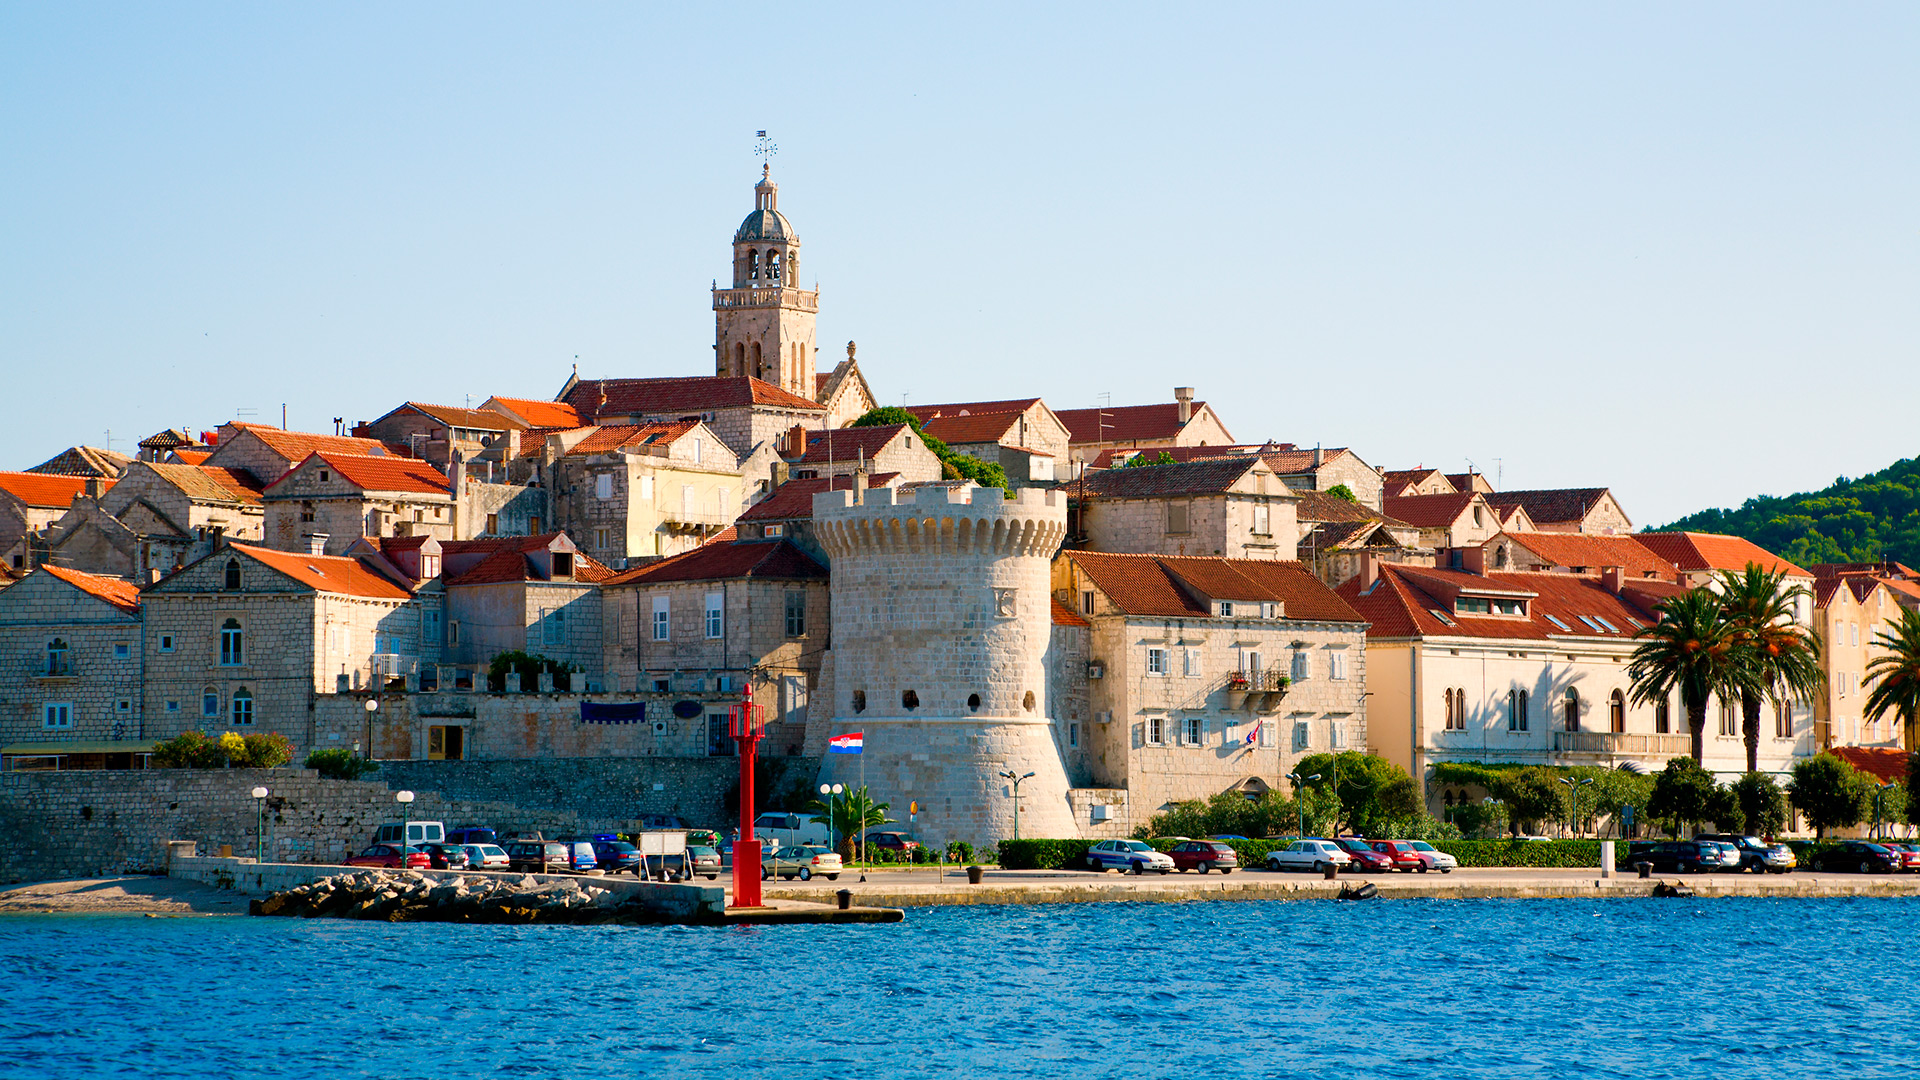 St Mark's Cathedral and the fortified walls, Korčula, Croatia - Croatian waters SimpleSail sailing routes